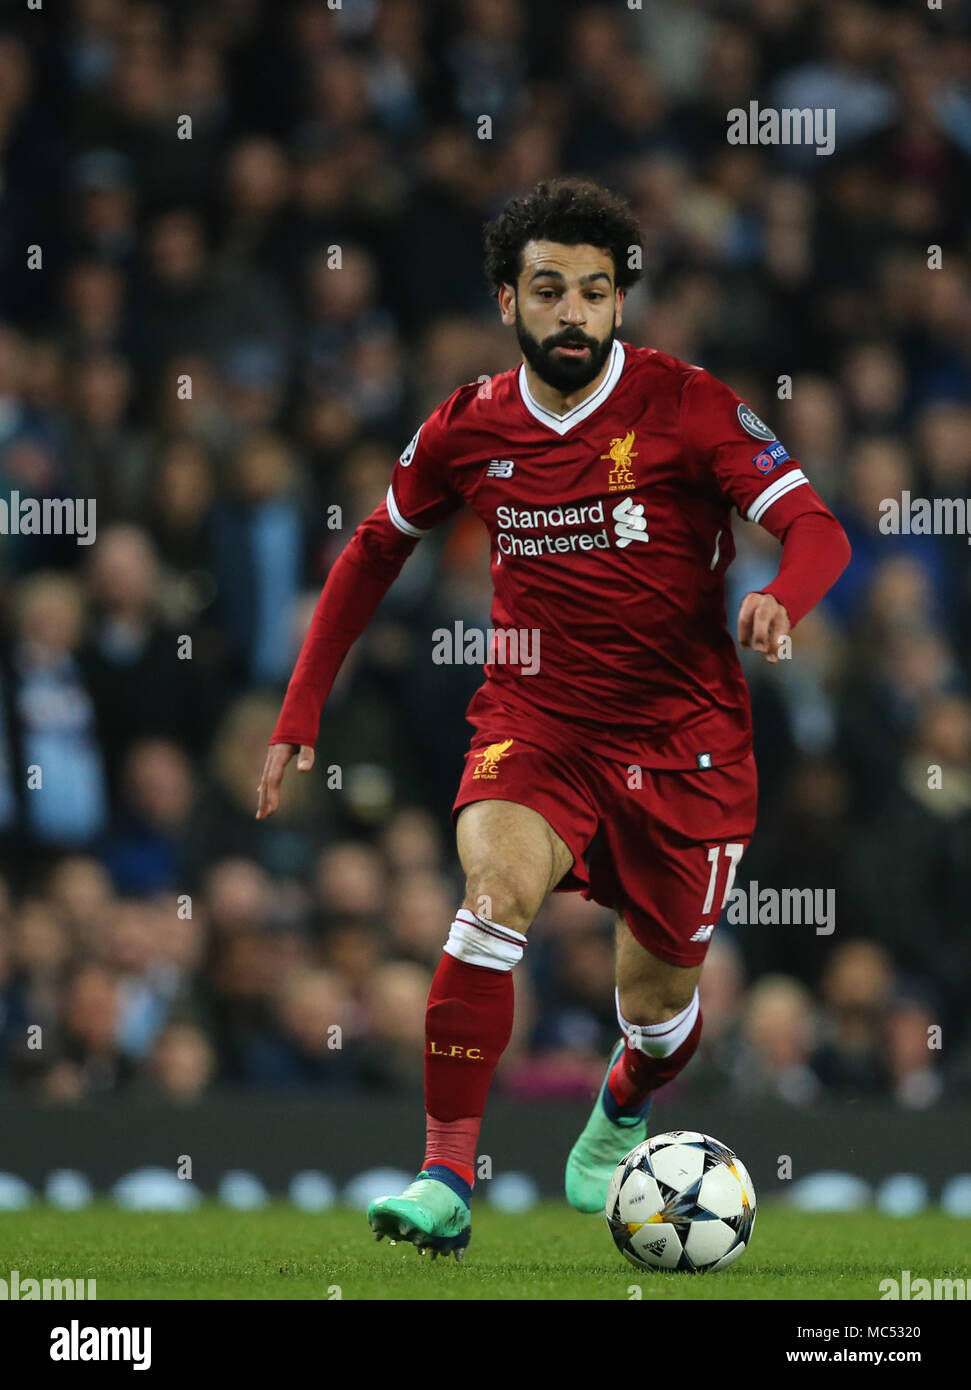 MANCHESTER, ENGLAND - APRIL 10: Mohamed Salah of Liverpool during the Champions League quarter final second leg match between Manchester City and Liverpool at the Etihad Stadium on April 10, 2018 in Manchester, United Kingdom. Stock Photo